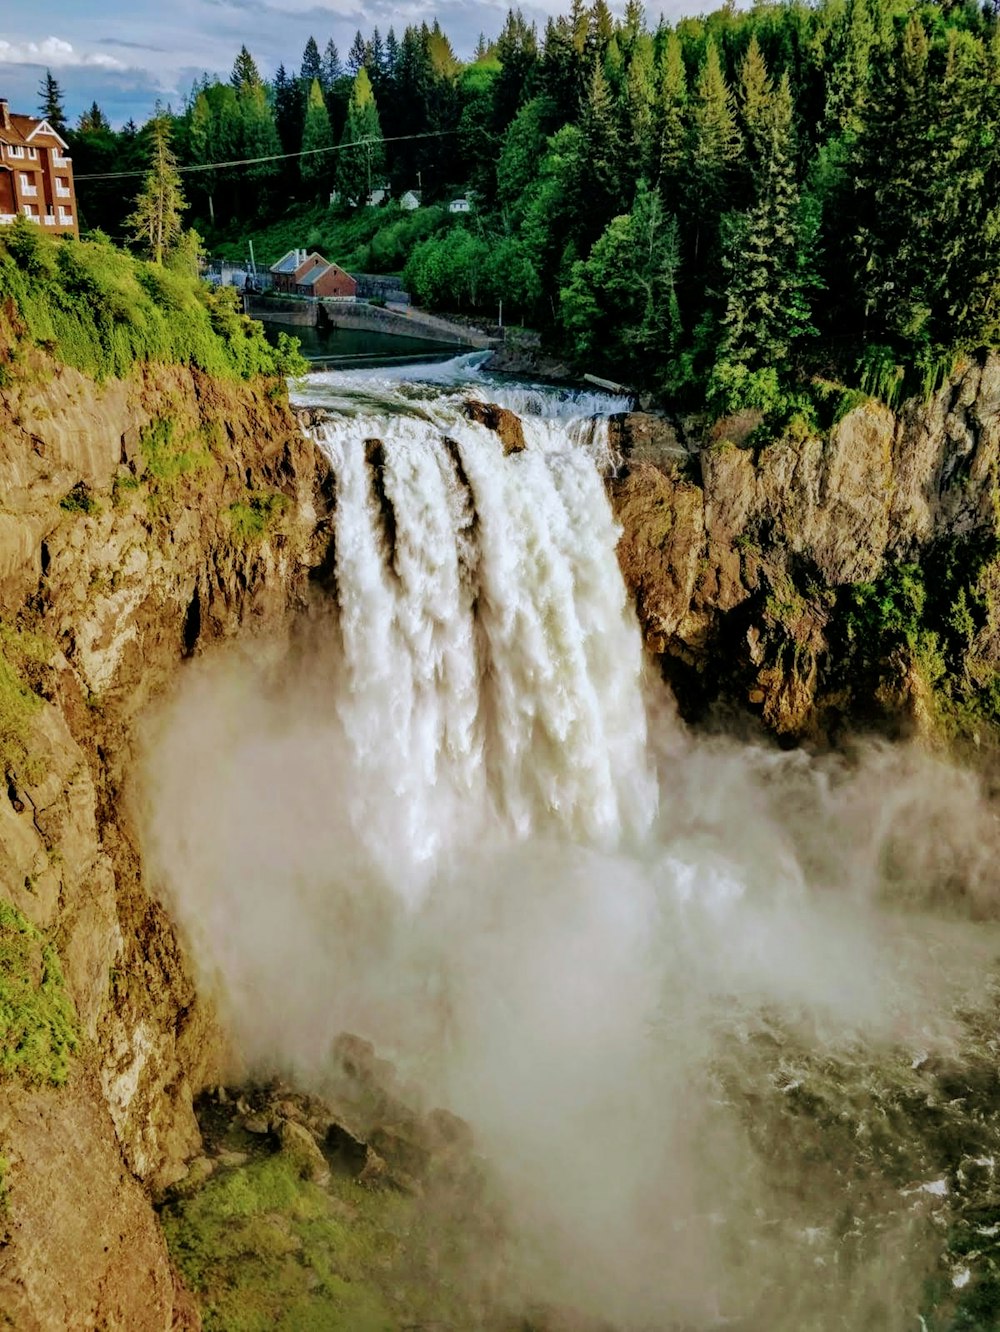 a view of a waterfall with a house in the background